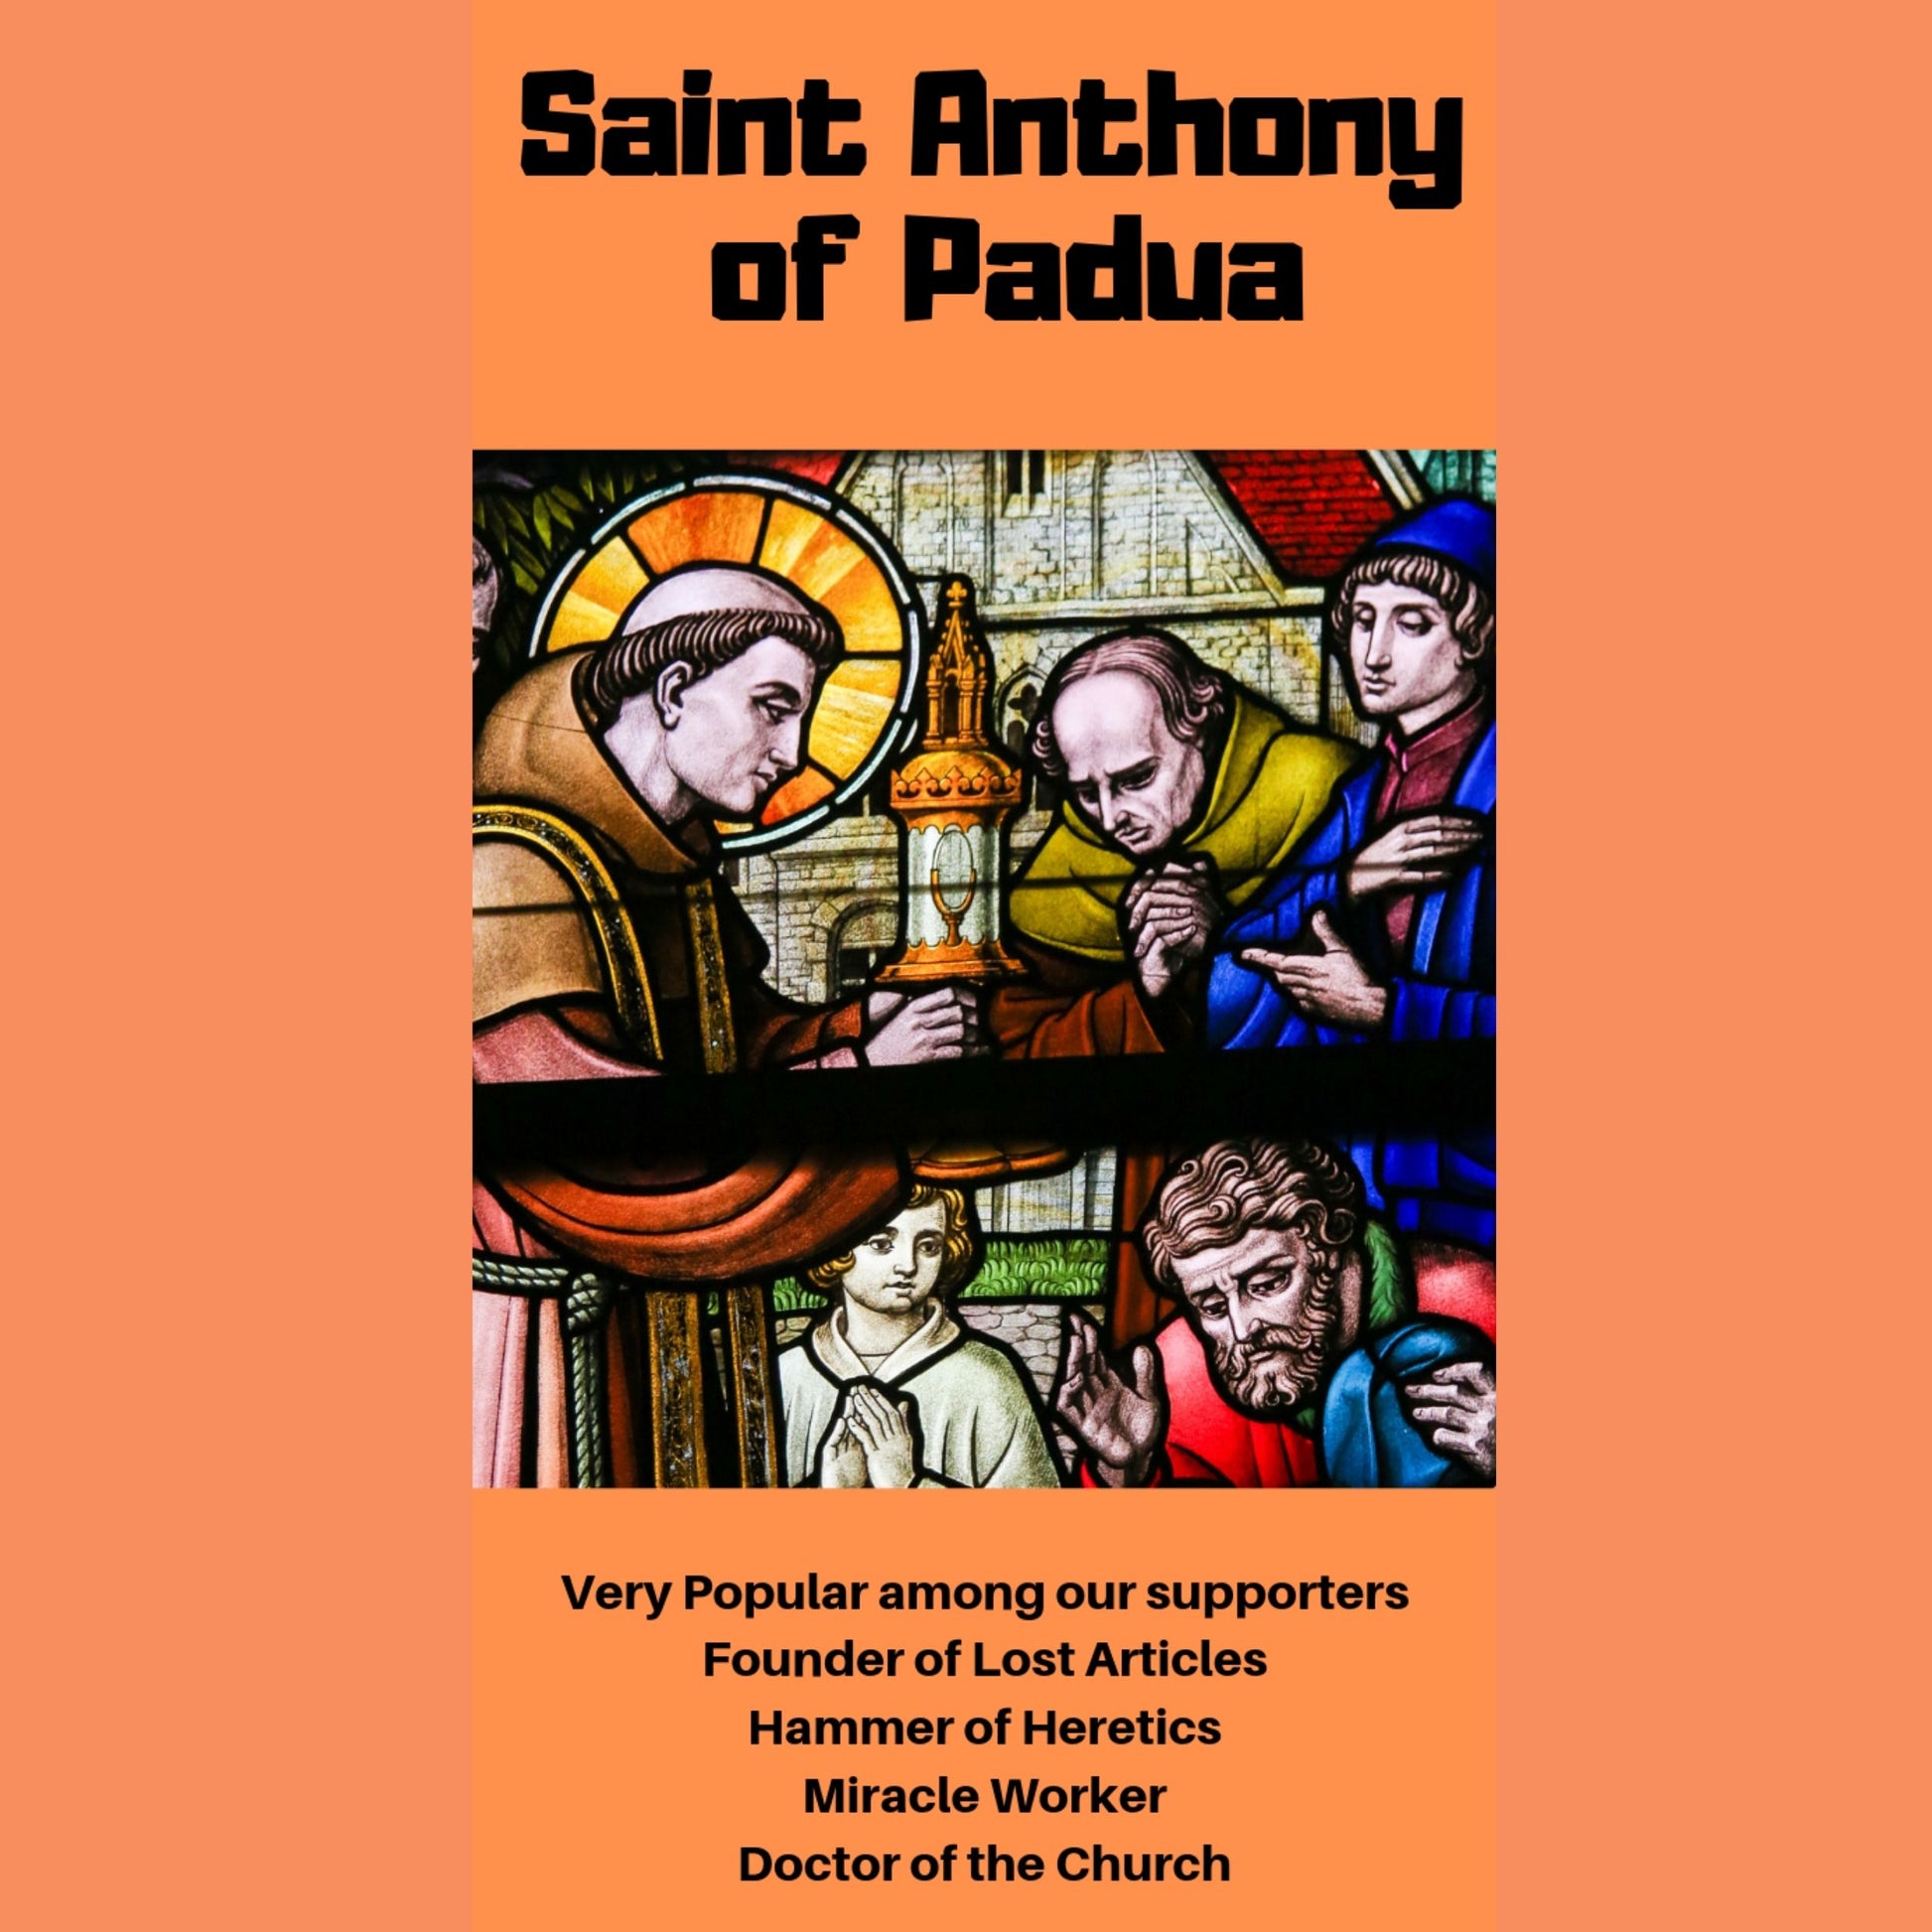 Saint Anthony of Padua Video Download MP4 - Bob and Penny Lord